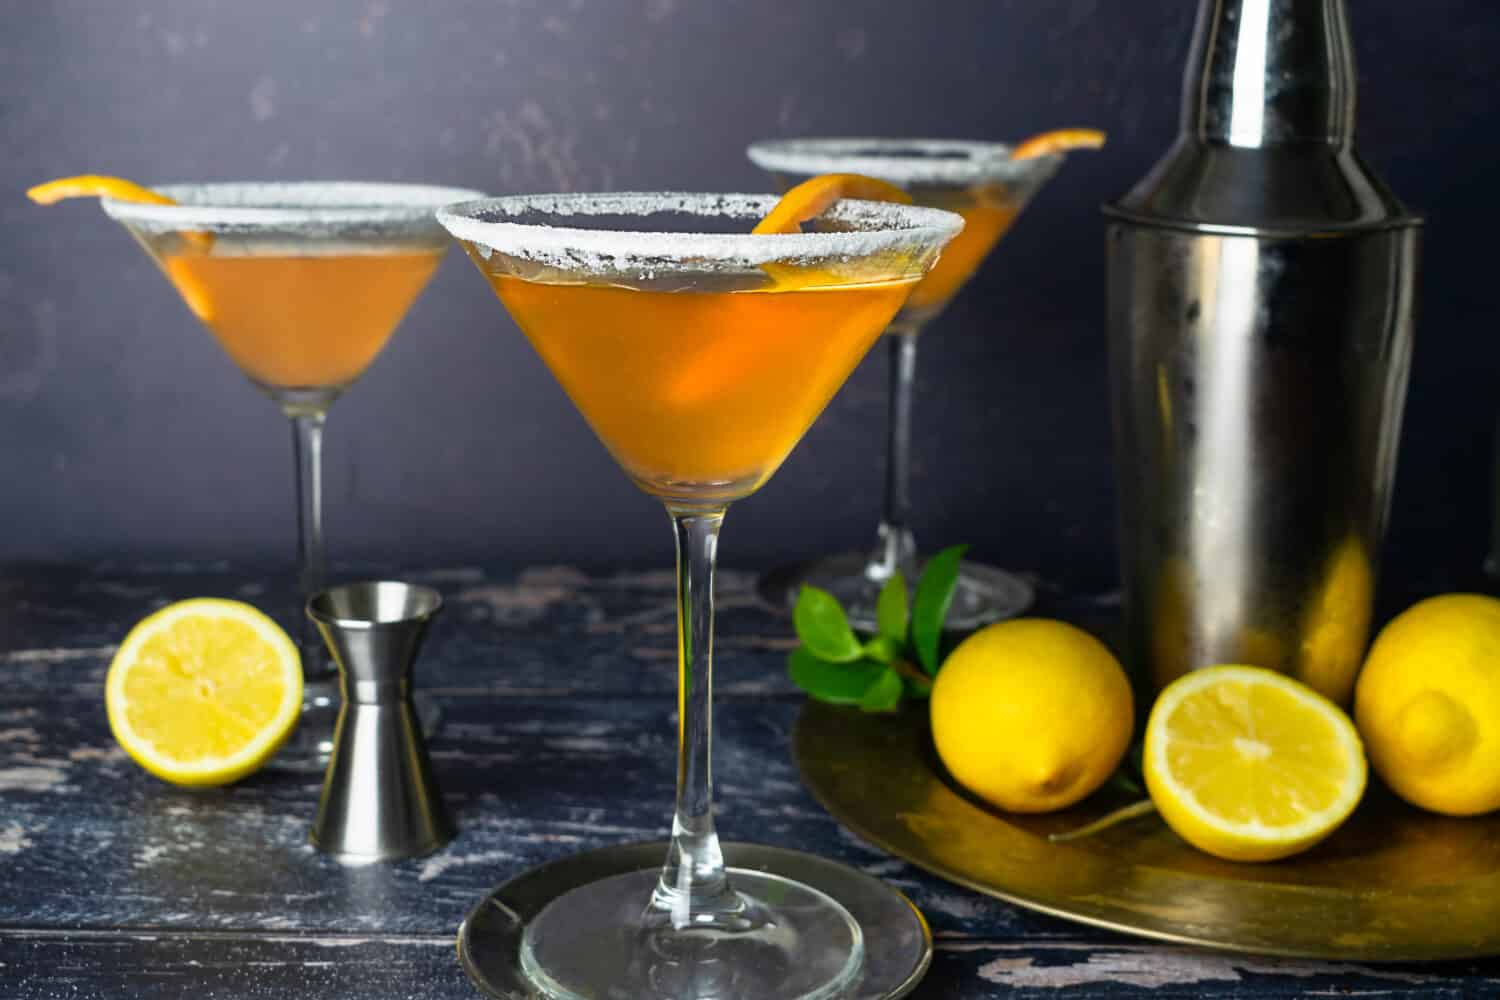 Sidecar Cocktail in a Martini glass with an orange peel on a dark background. Ingredients: Cognac, Cointreau, lemon juice, sugar and ice. Shaker and lemon in the background. Sugar on the rim